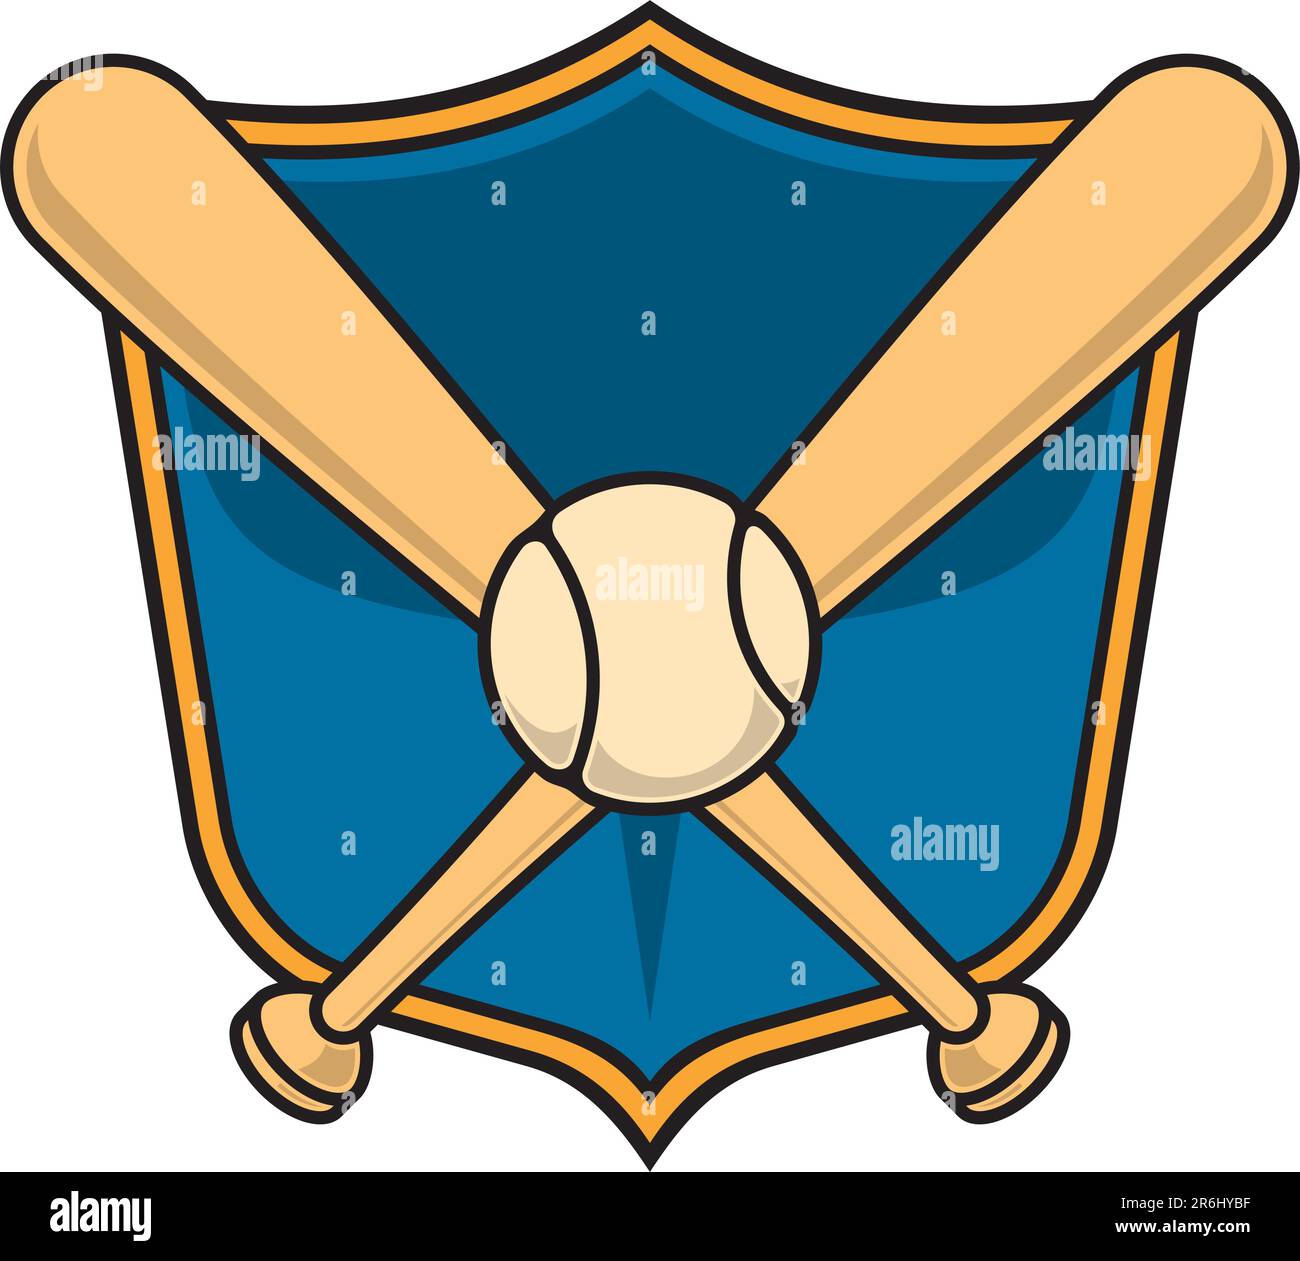 Vector baseball icon with two bats and a ball over a shield. Stock Vector